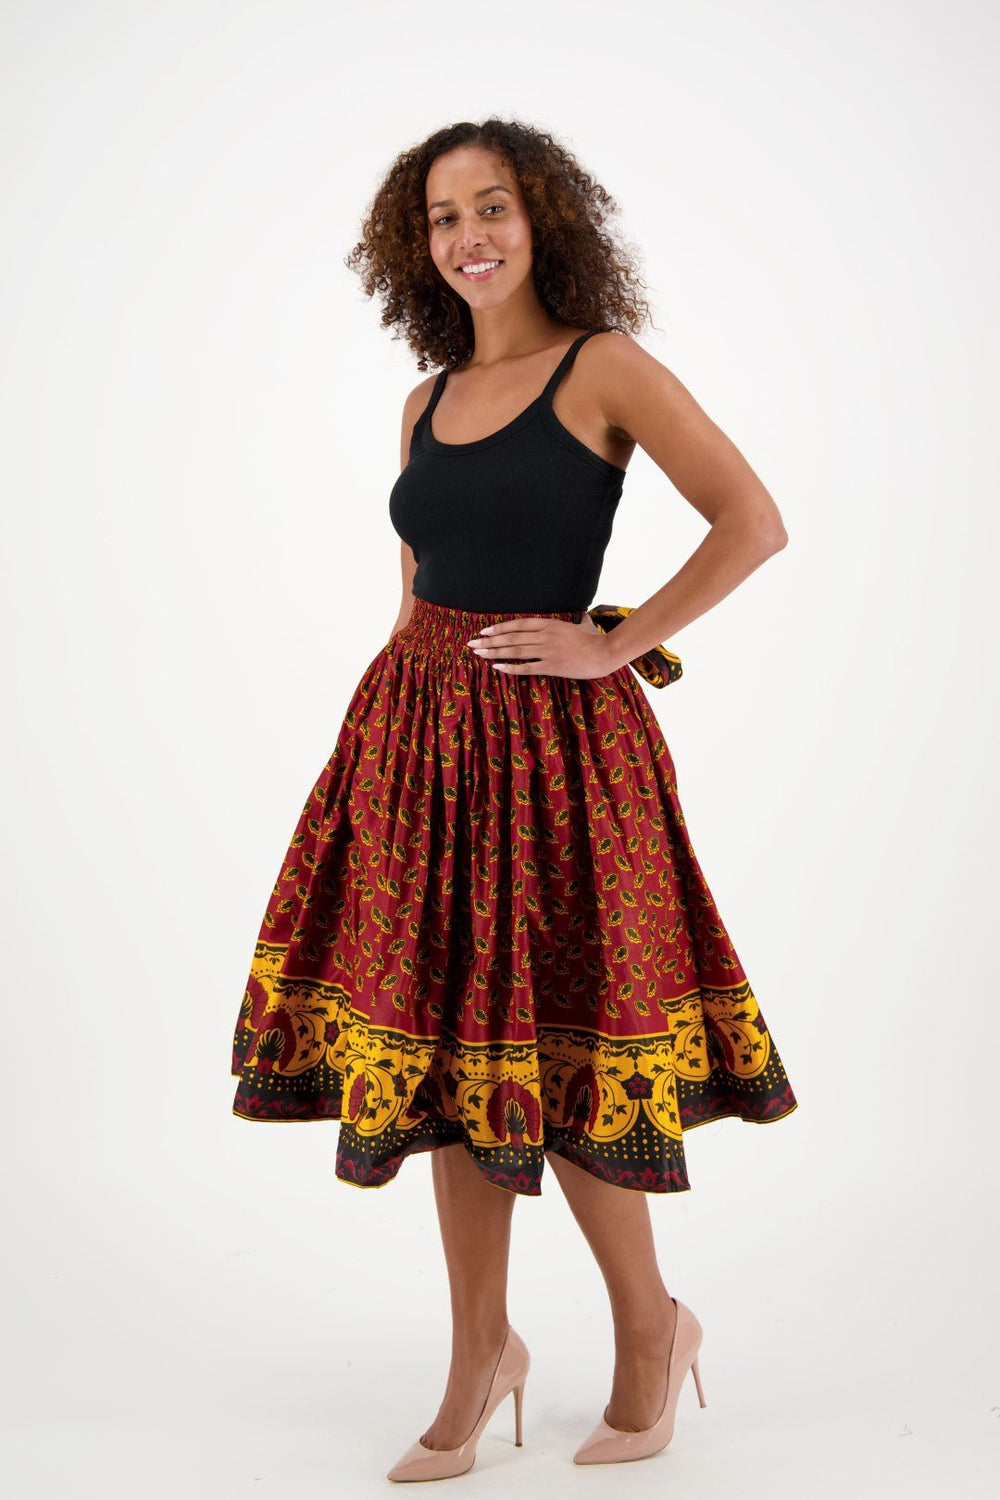 Mid-Length African Print Maxi Skirt Pockets Headwrap Included 16321-1128 - Advance Apparels Inc